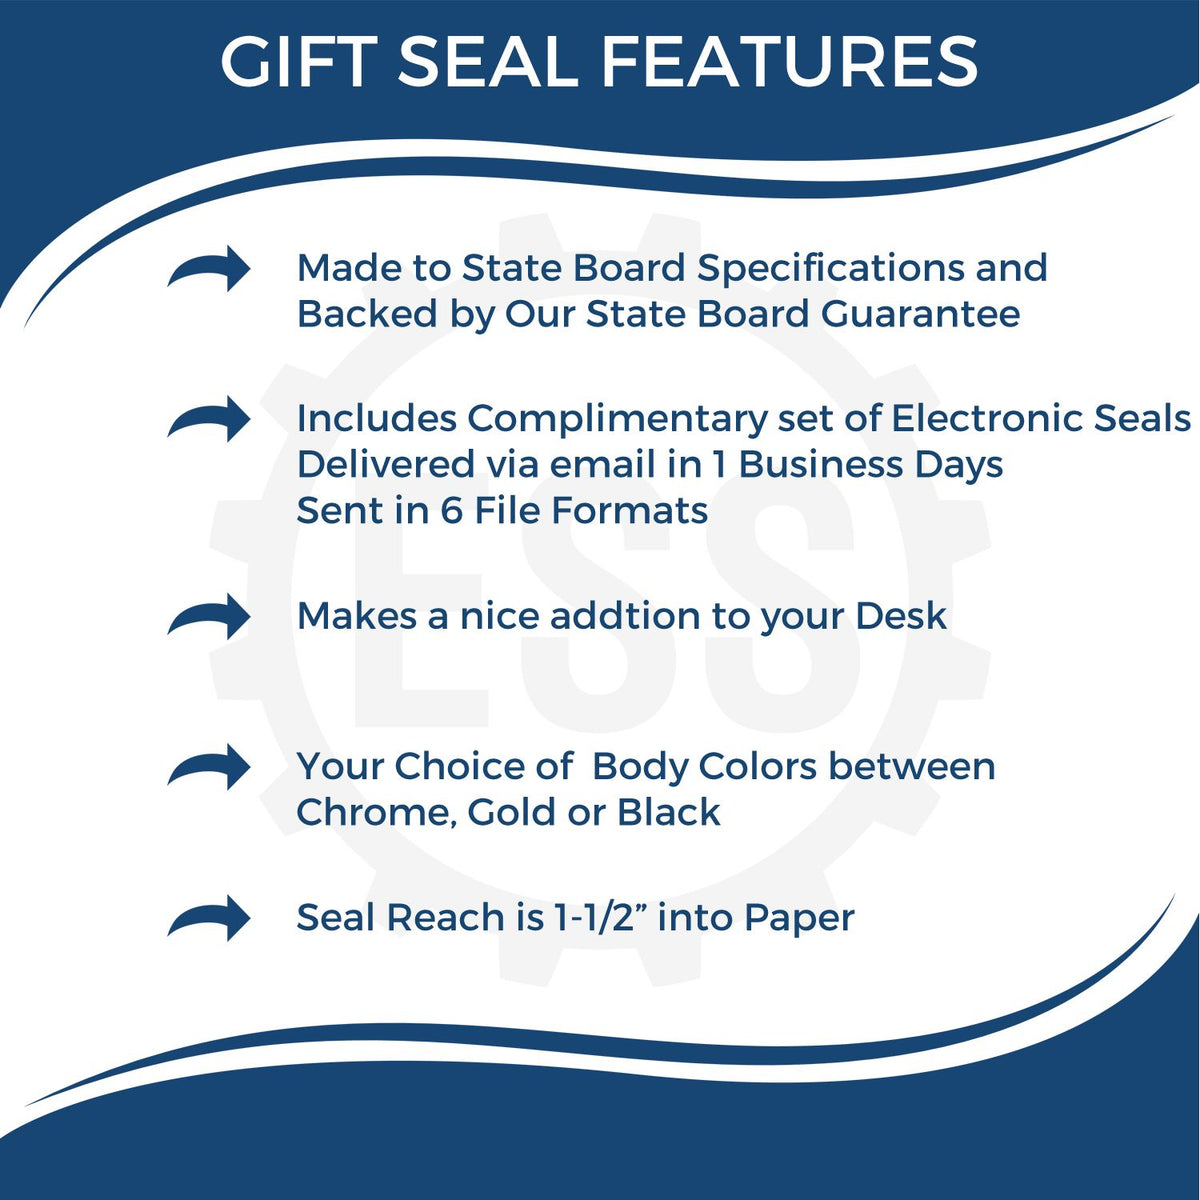 A picture of an infographic highlighting the selling points for the Gift Ohio Land Surveyor Seal